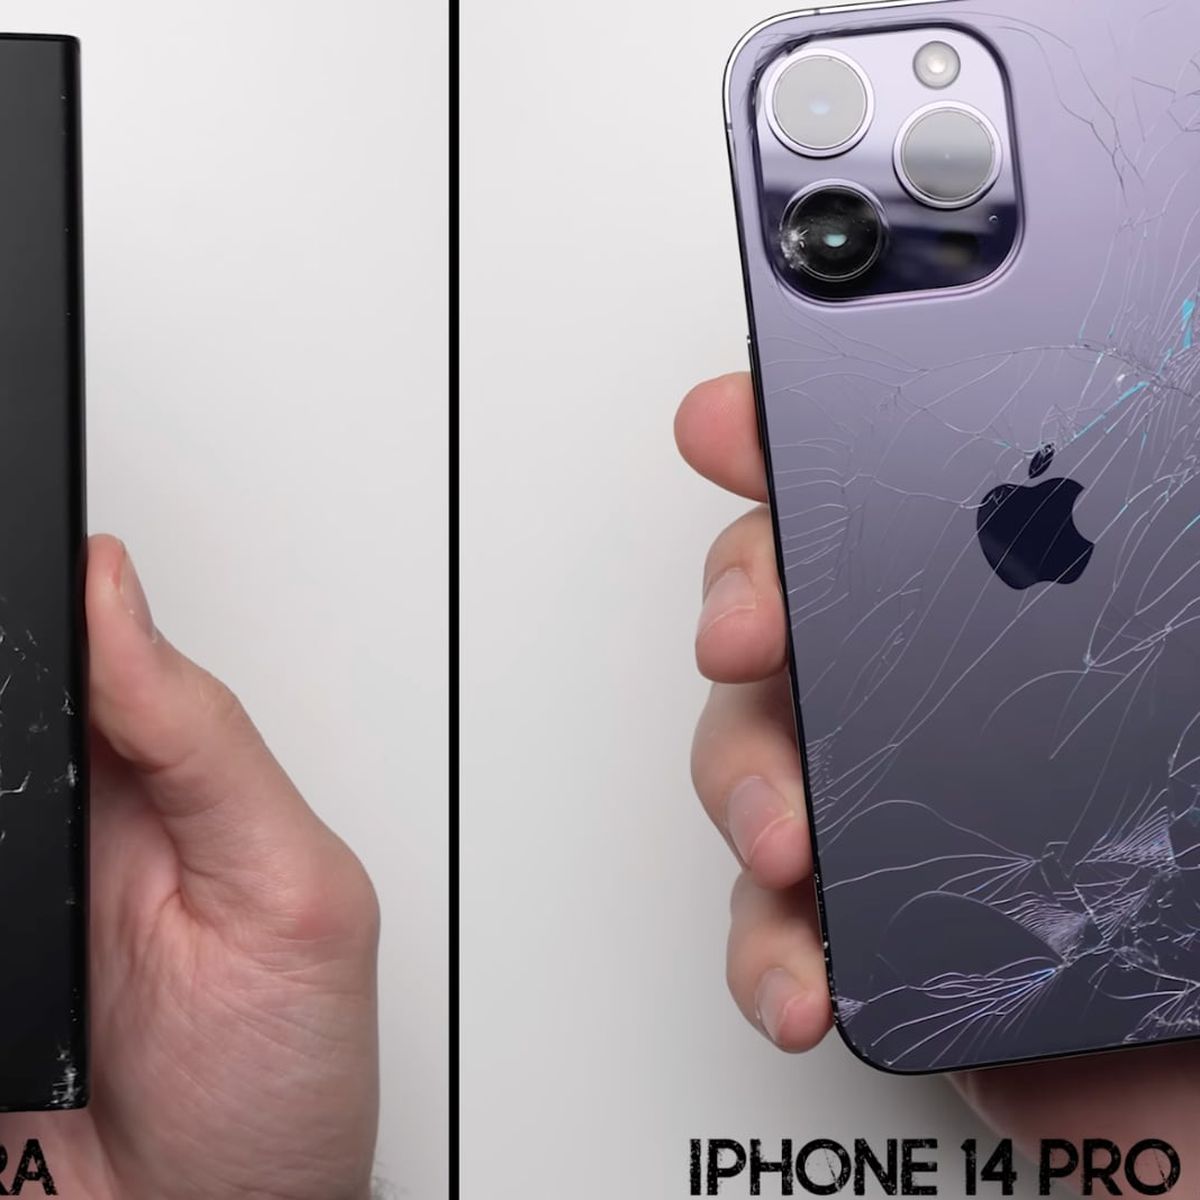 Is iPhone 14 Pro crack proof?